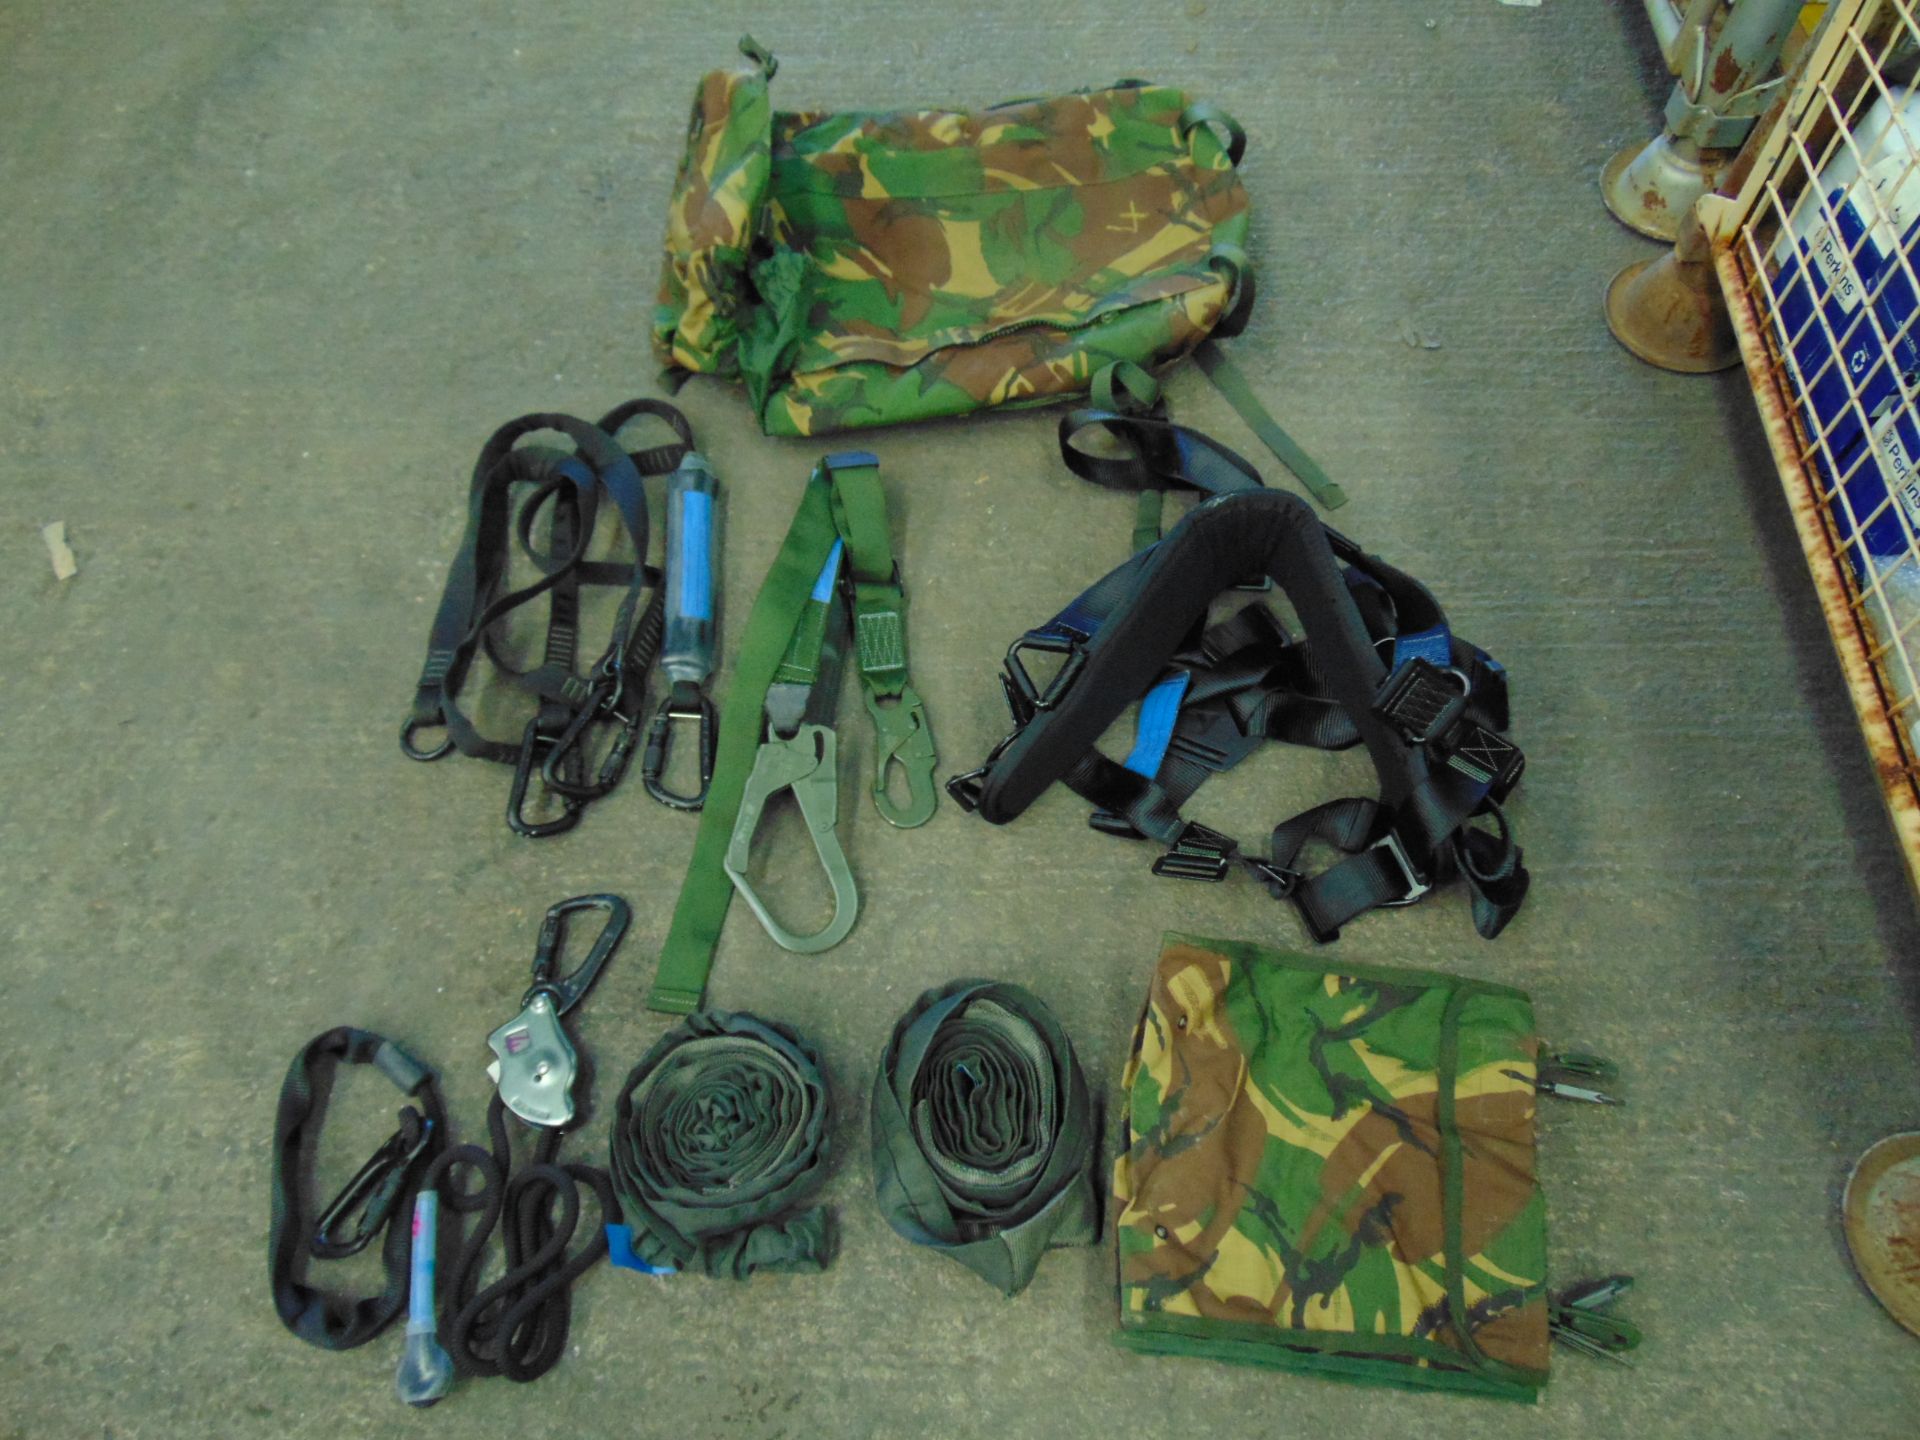 Spanset Full Body Harness with Work Position Lanyards etc